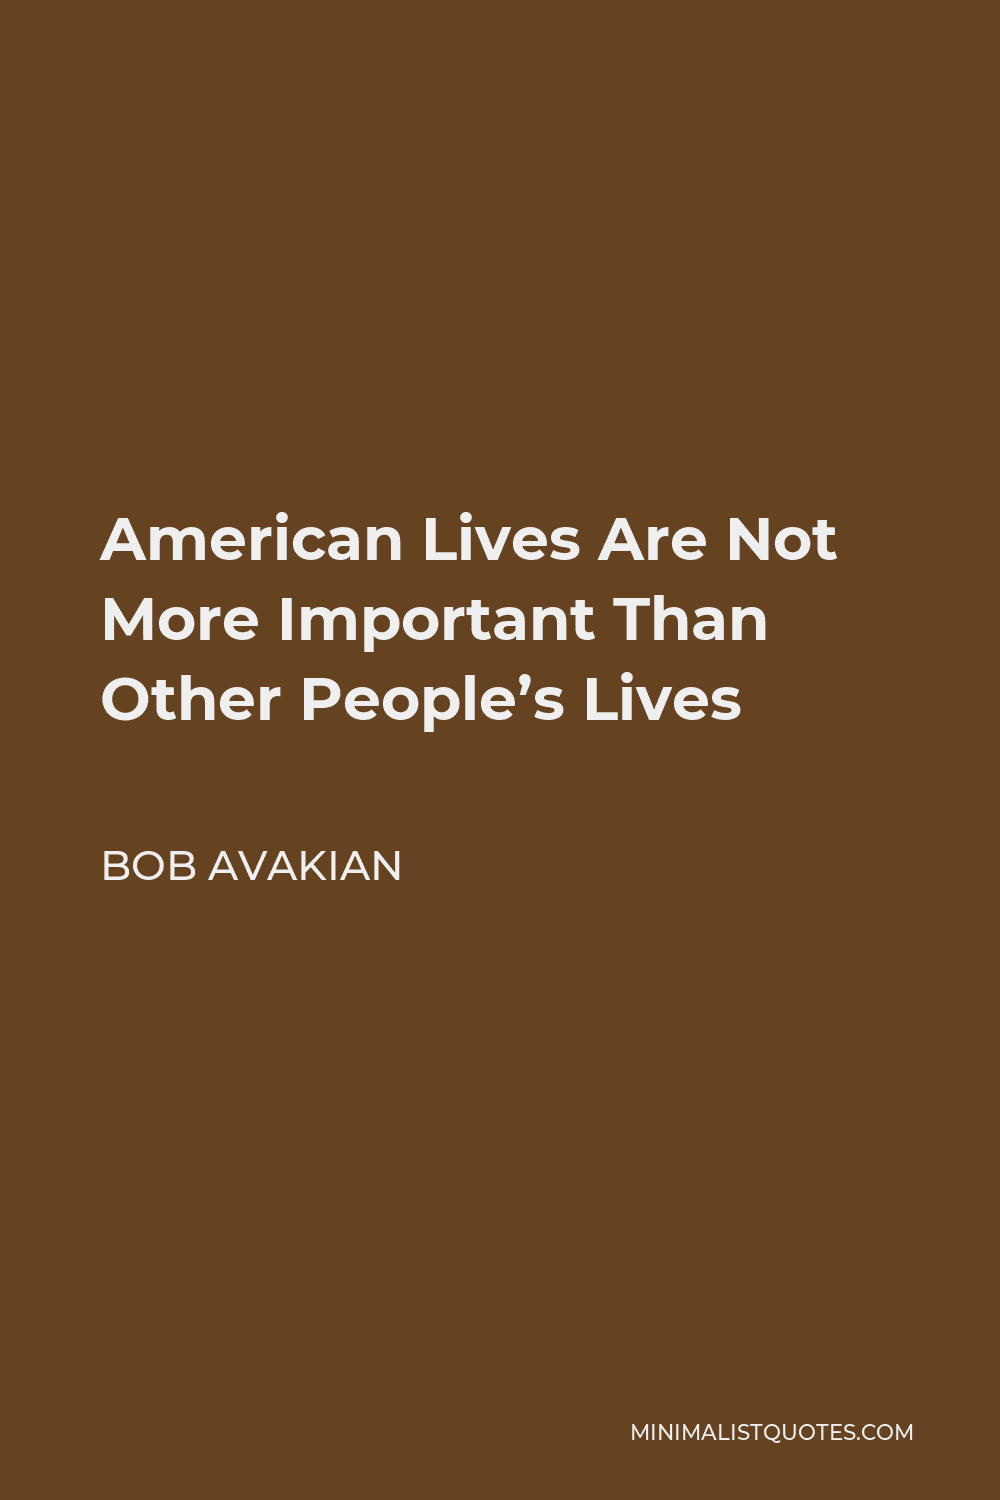 Bob Avakian Quote - American Lives Are Not More Important Than Other People’s Lives